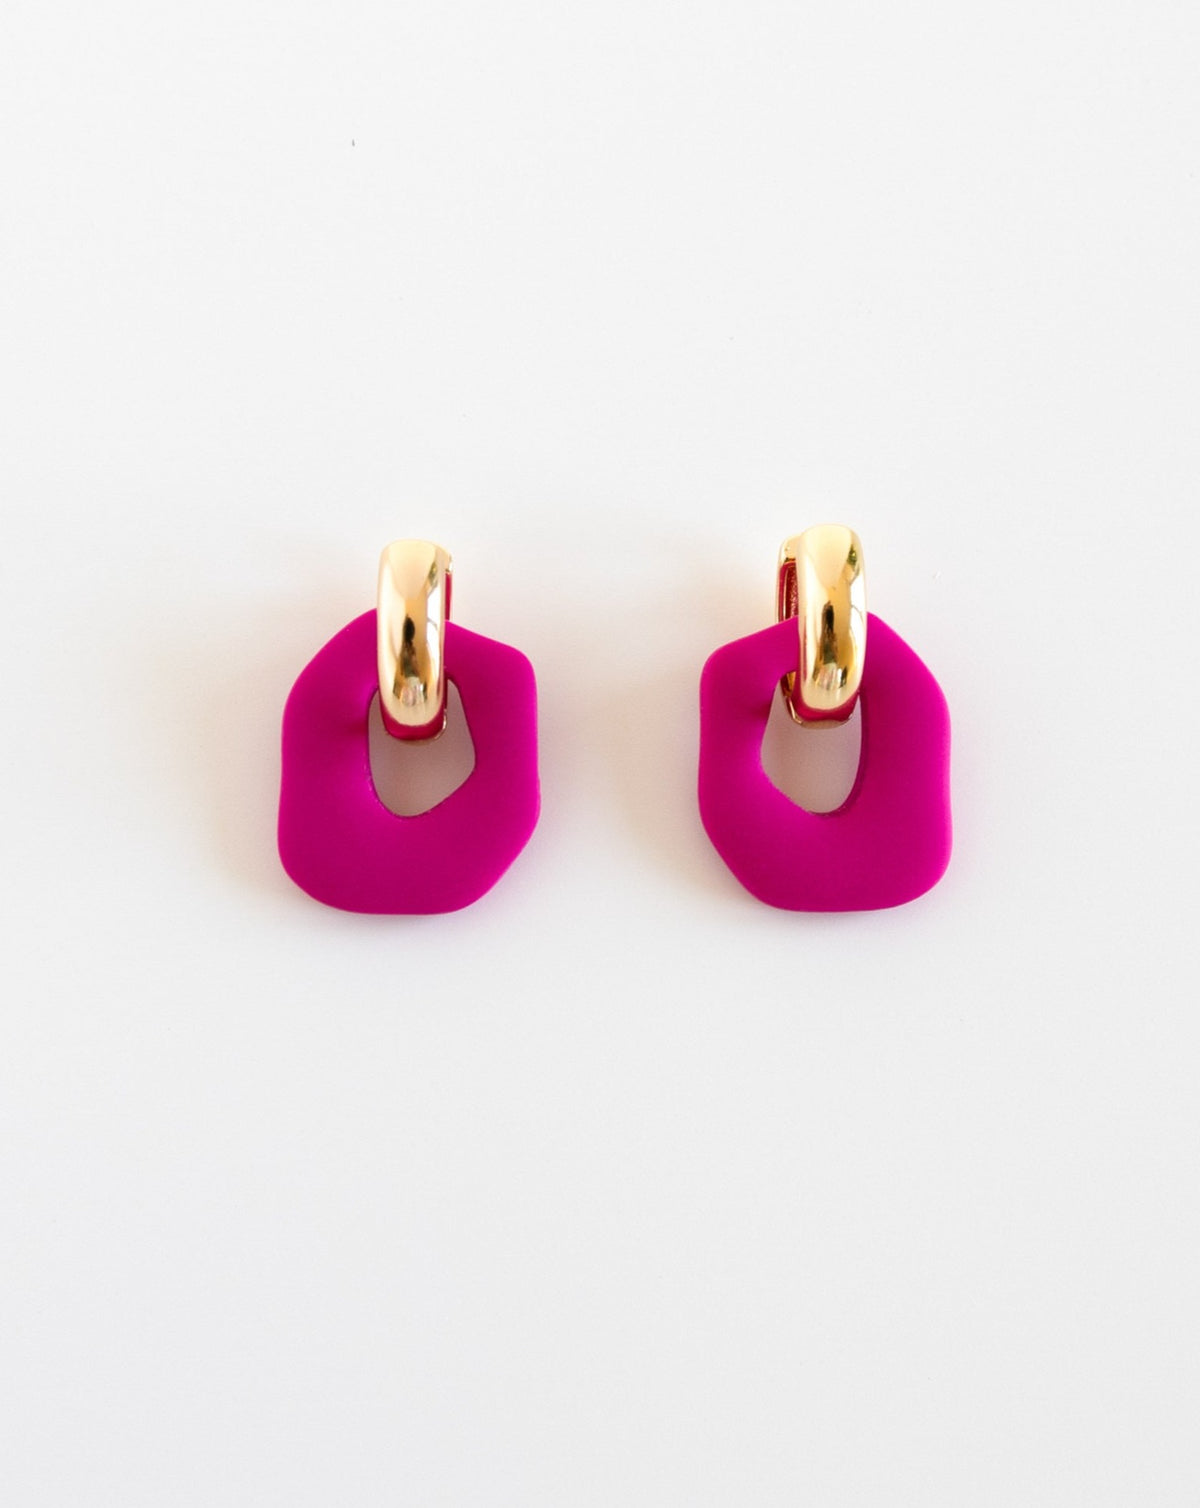 Darien earrings in Fuchsia color with gold hoops, front view